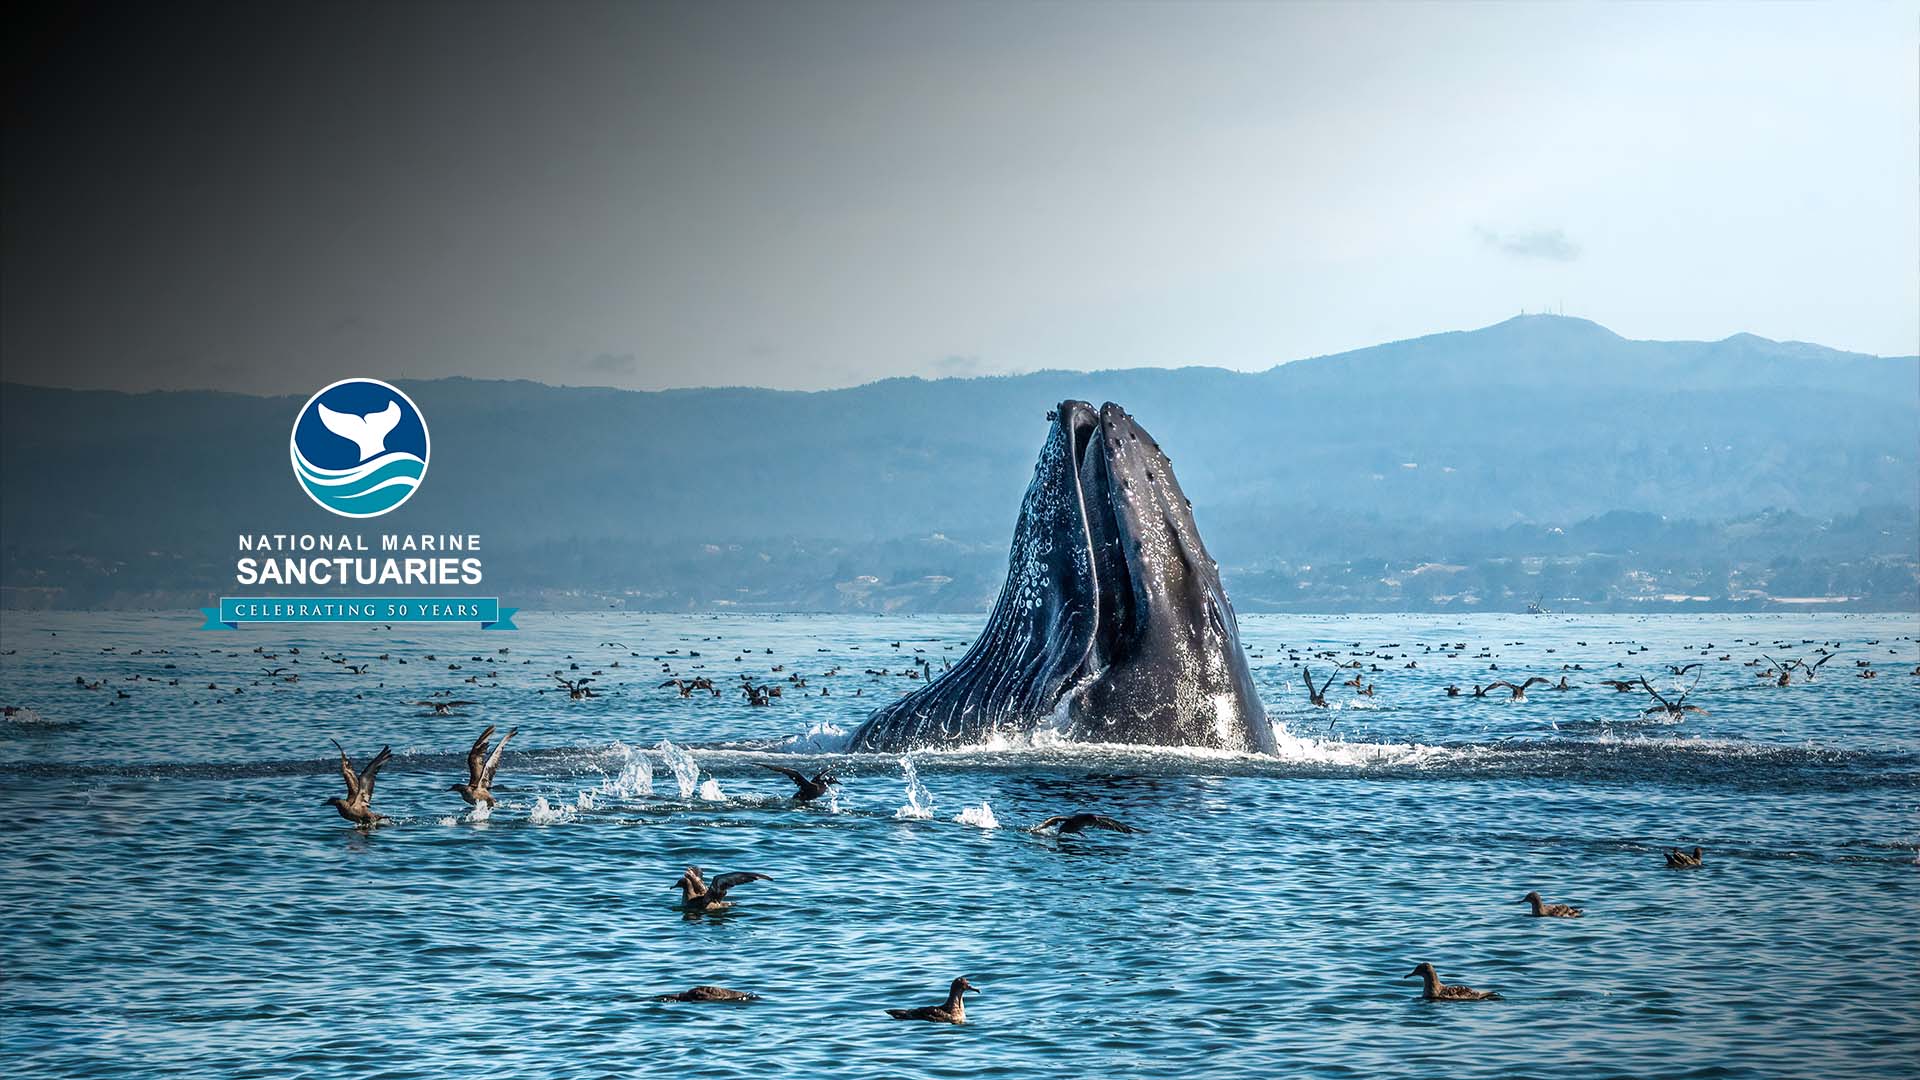 a picture of a whale breaching the water with the words national marine sanctuaries celebrating 50 years